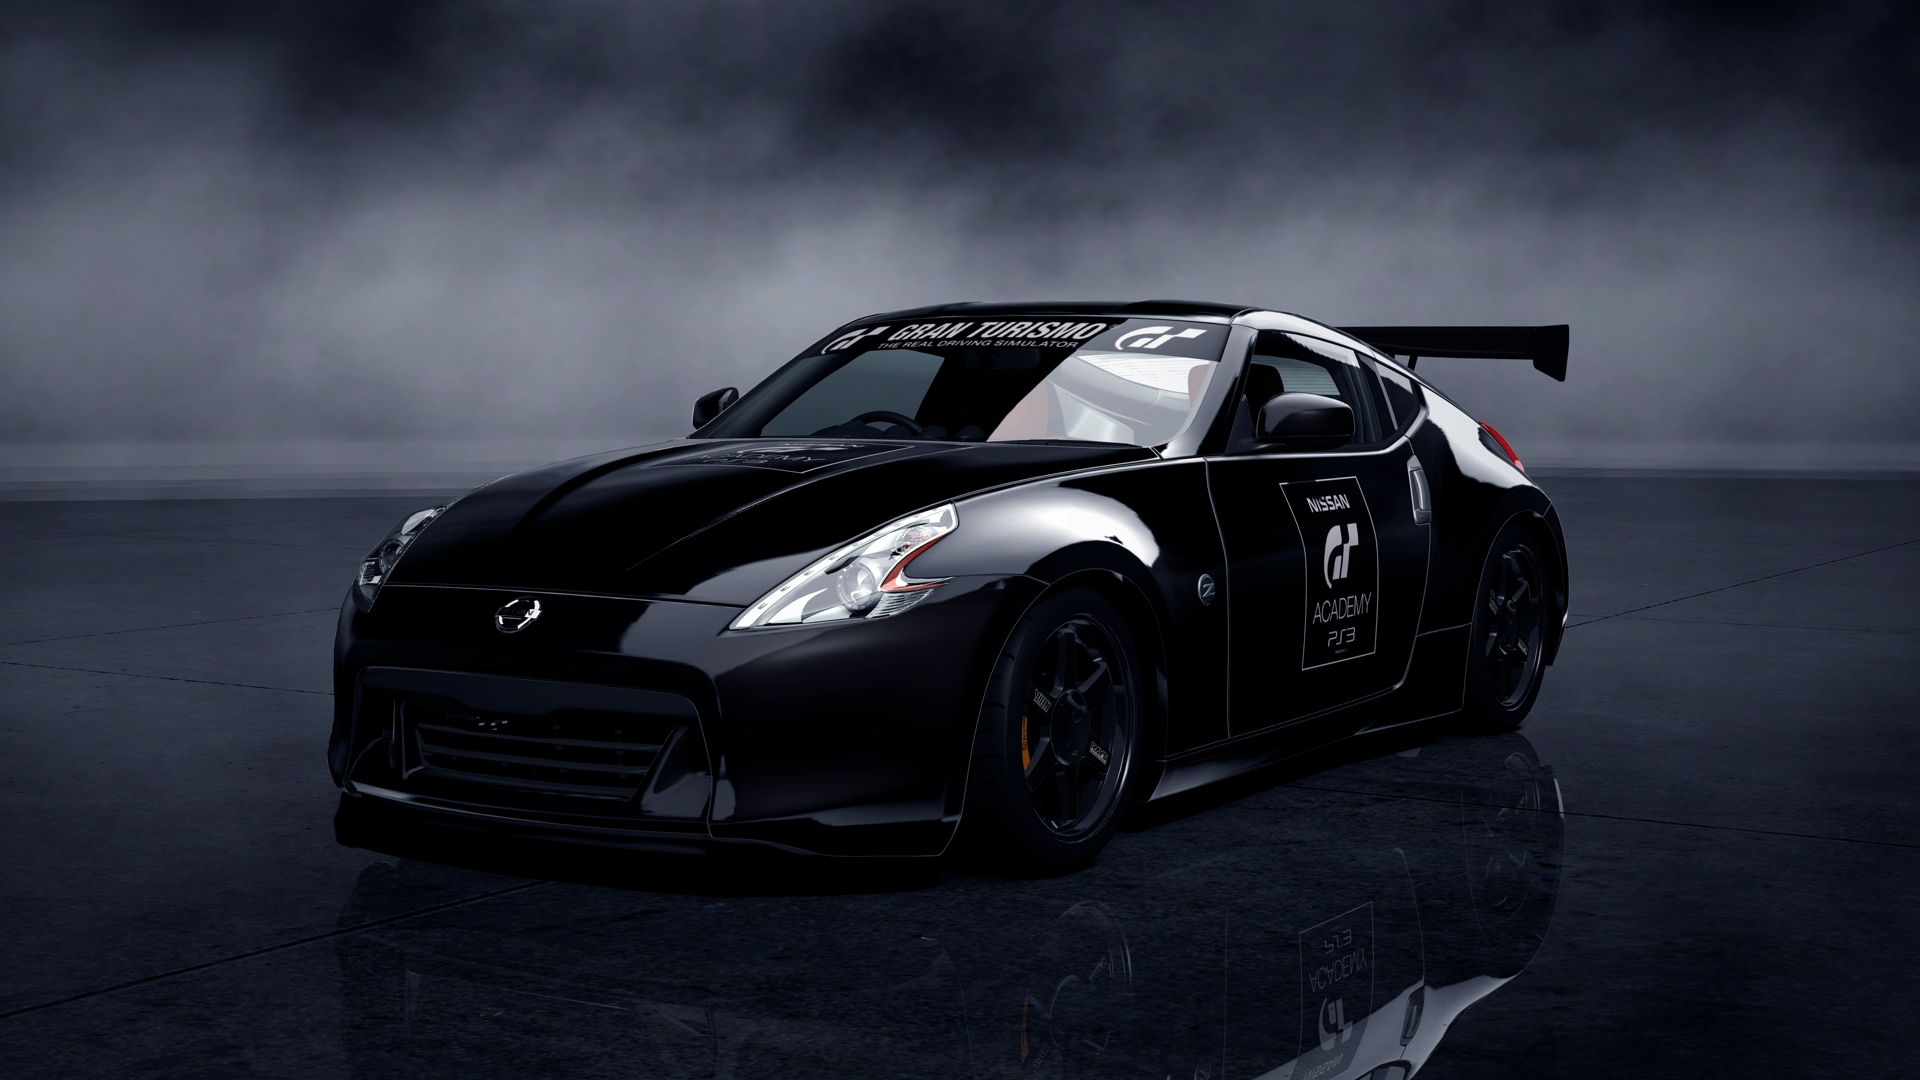 23929 download wallpaper nissan, transport, auto, black screensavers and pictures for free